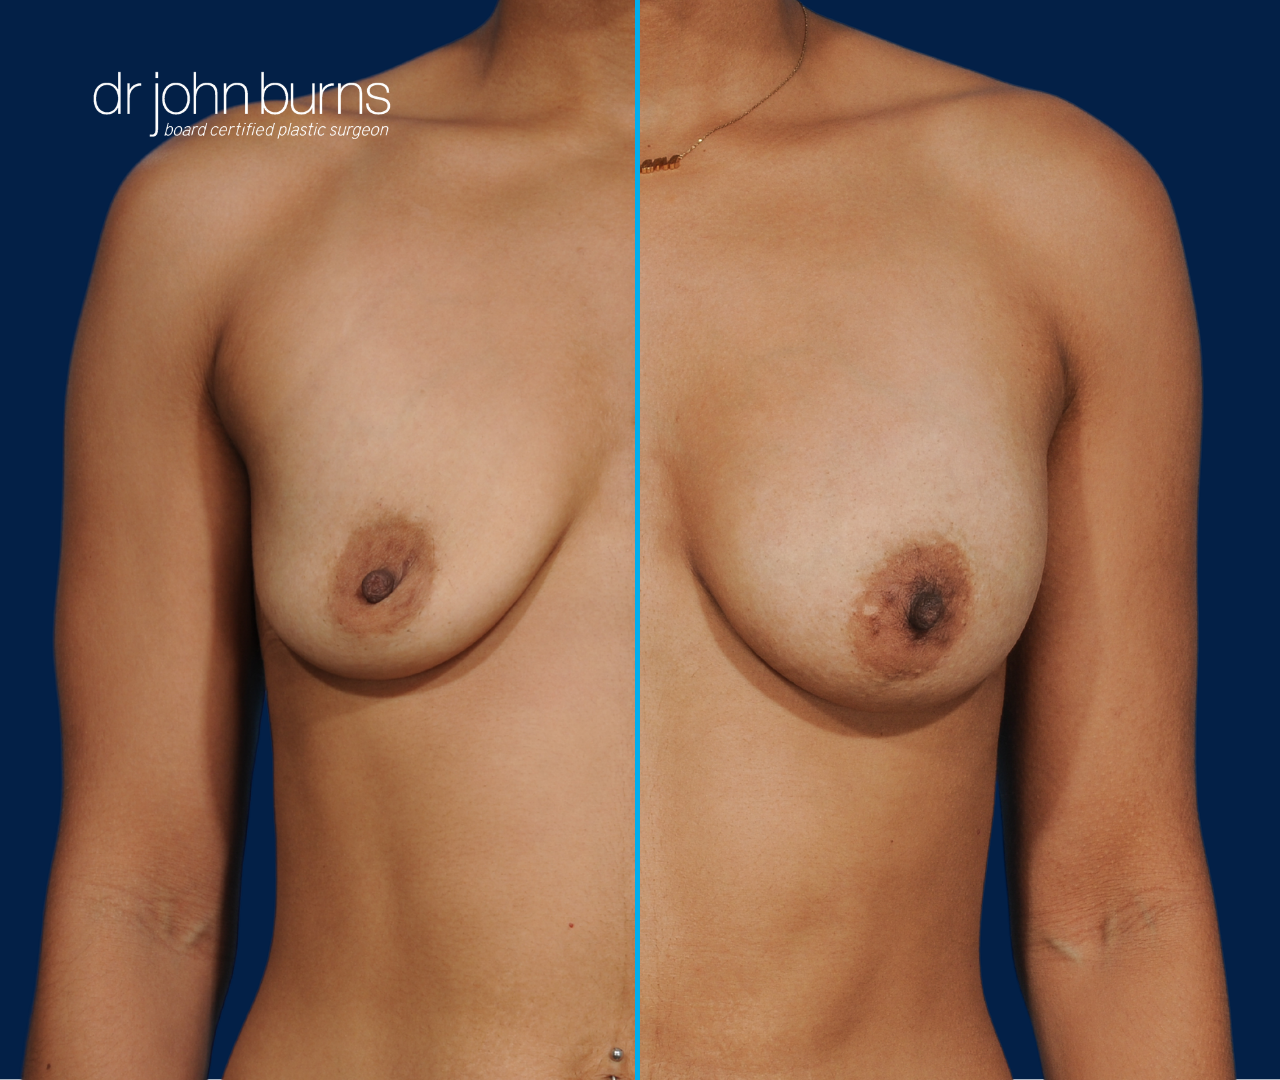 case 9- split screen before & after fat transfer to breast by top plastic surgeon, Dr. John Burns